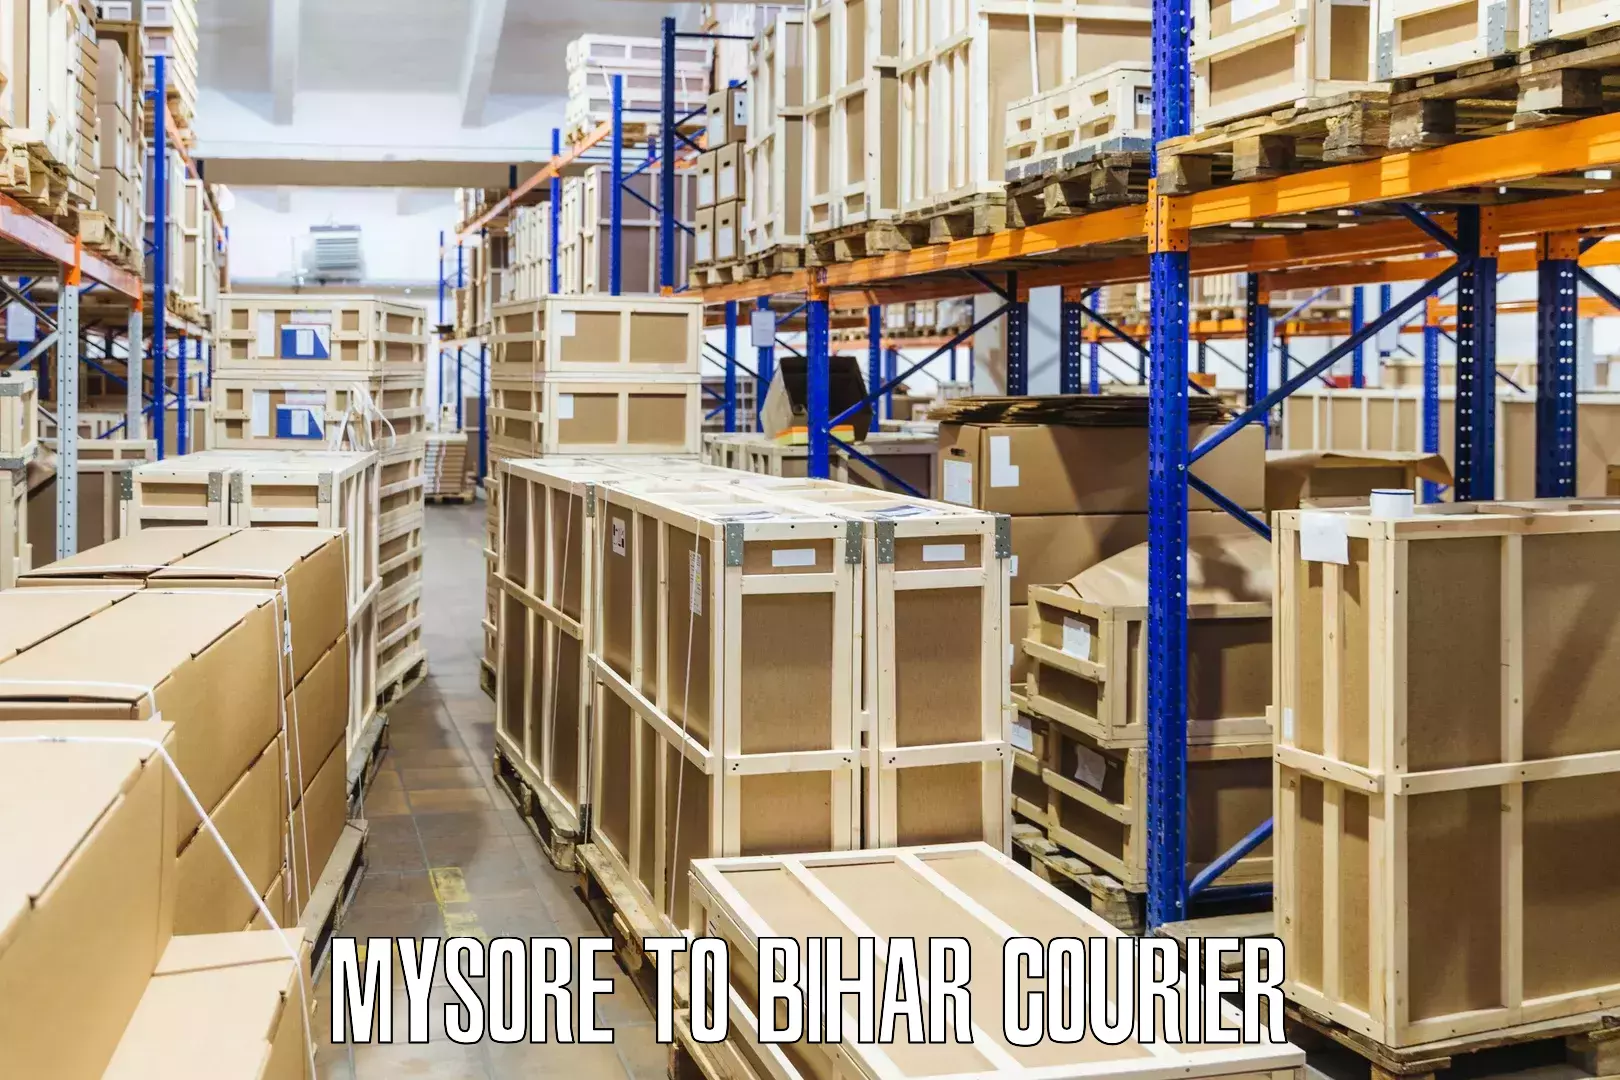 Nationwide shipping coverage Mysore to Rajgir